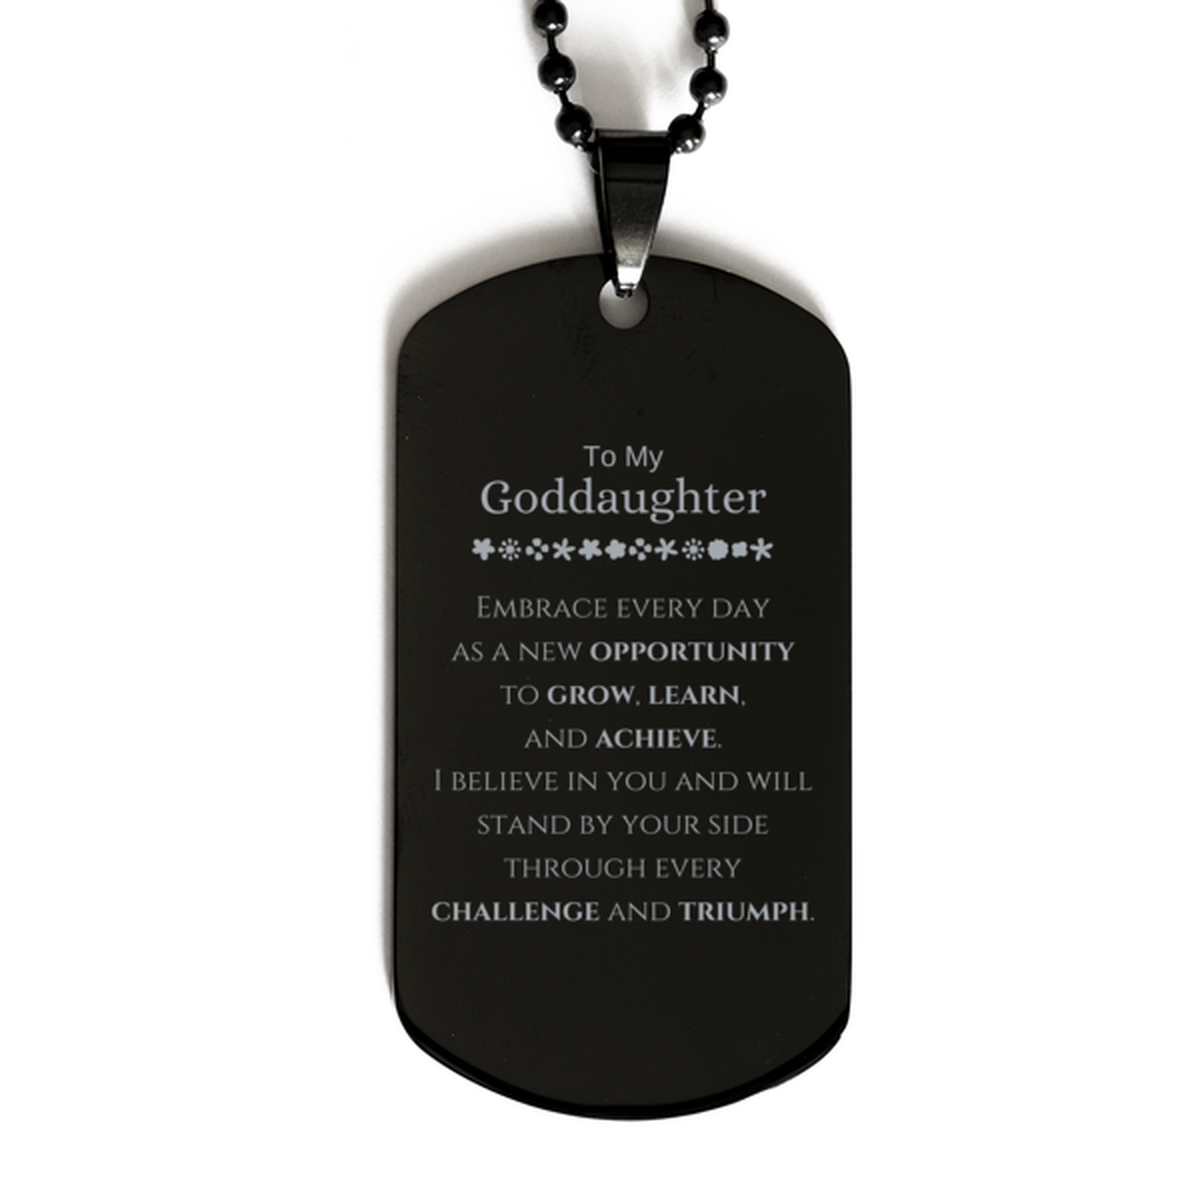 To My Goddaughter Gifts, I believe in you and will stand by your side, Inspirational Black Dog Tag For Goddaughter, Birthday Christmas Motivational Goddaughter Gifts